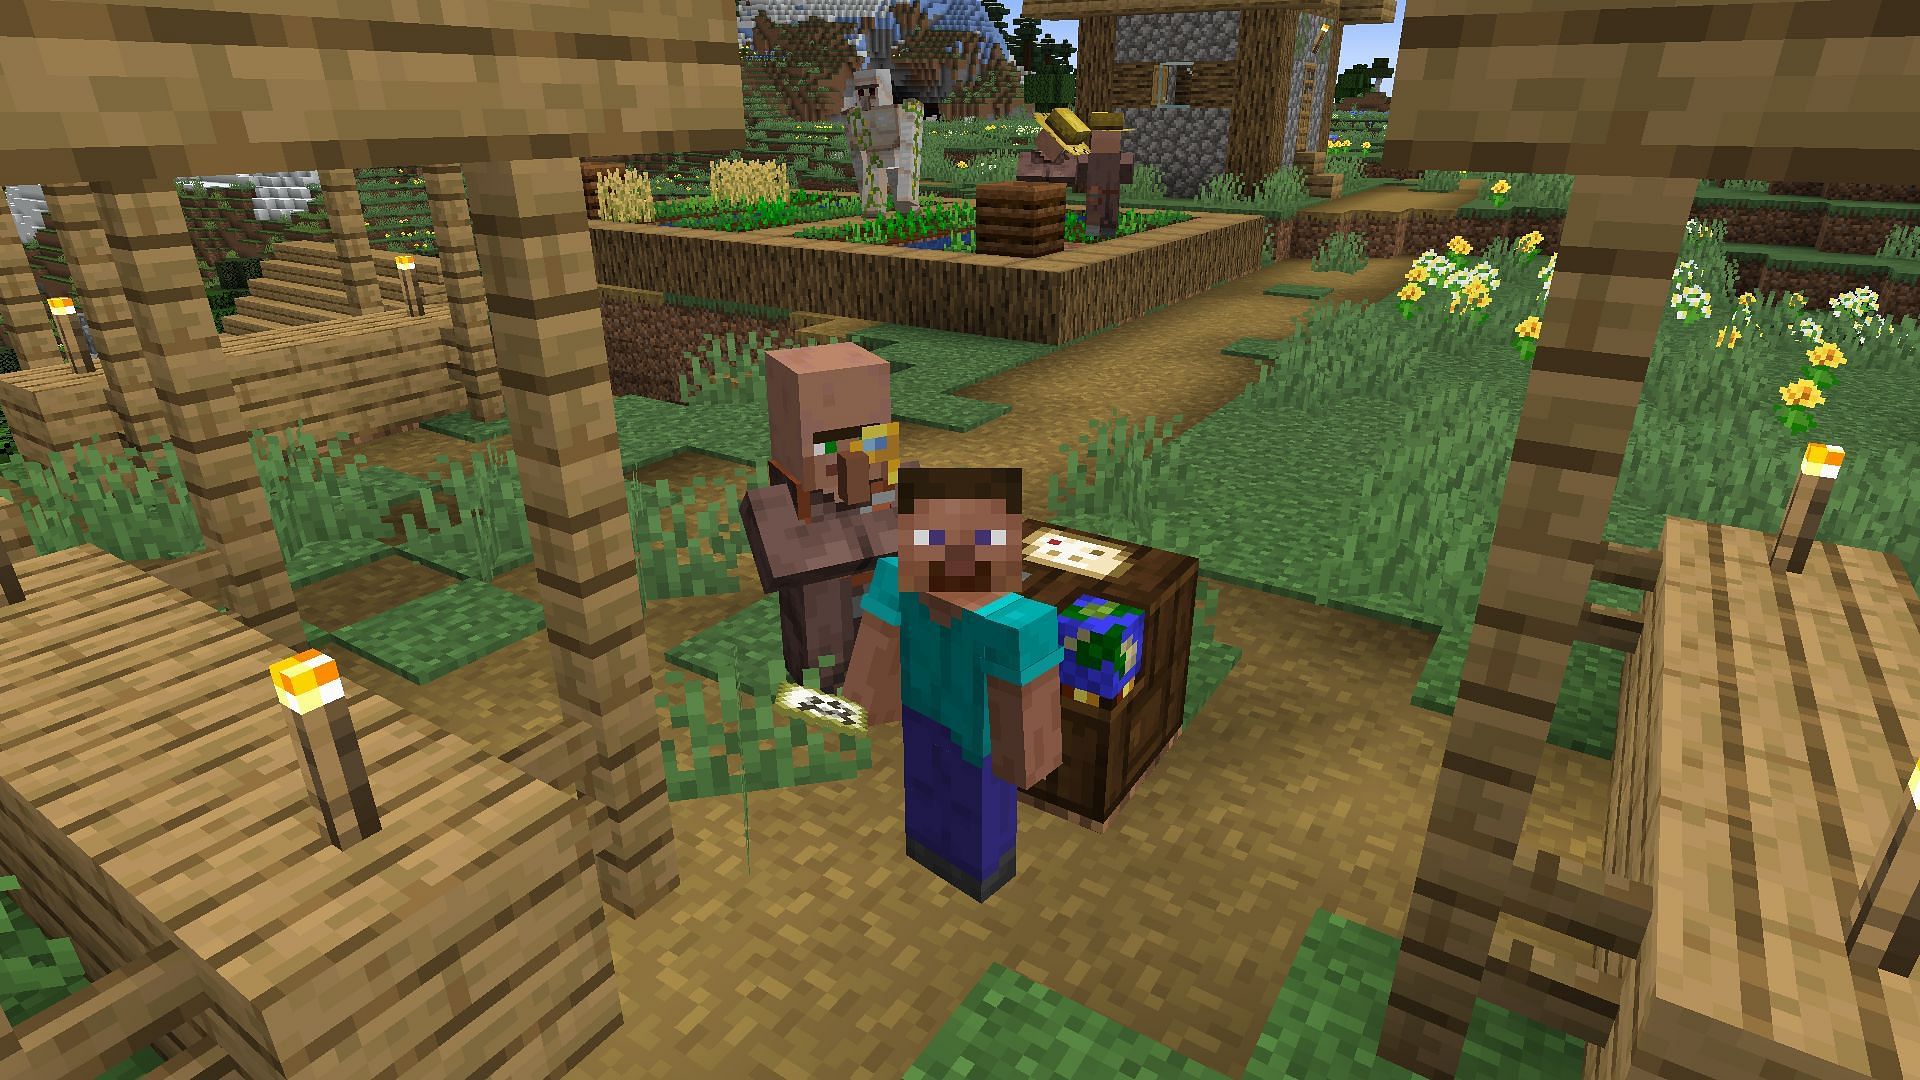 Minecraft snapshot 24w12a patch notes: Trial chambers explorer map, added new advancements, and more